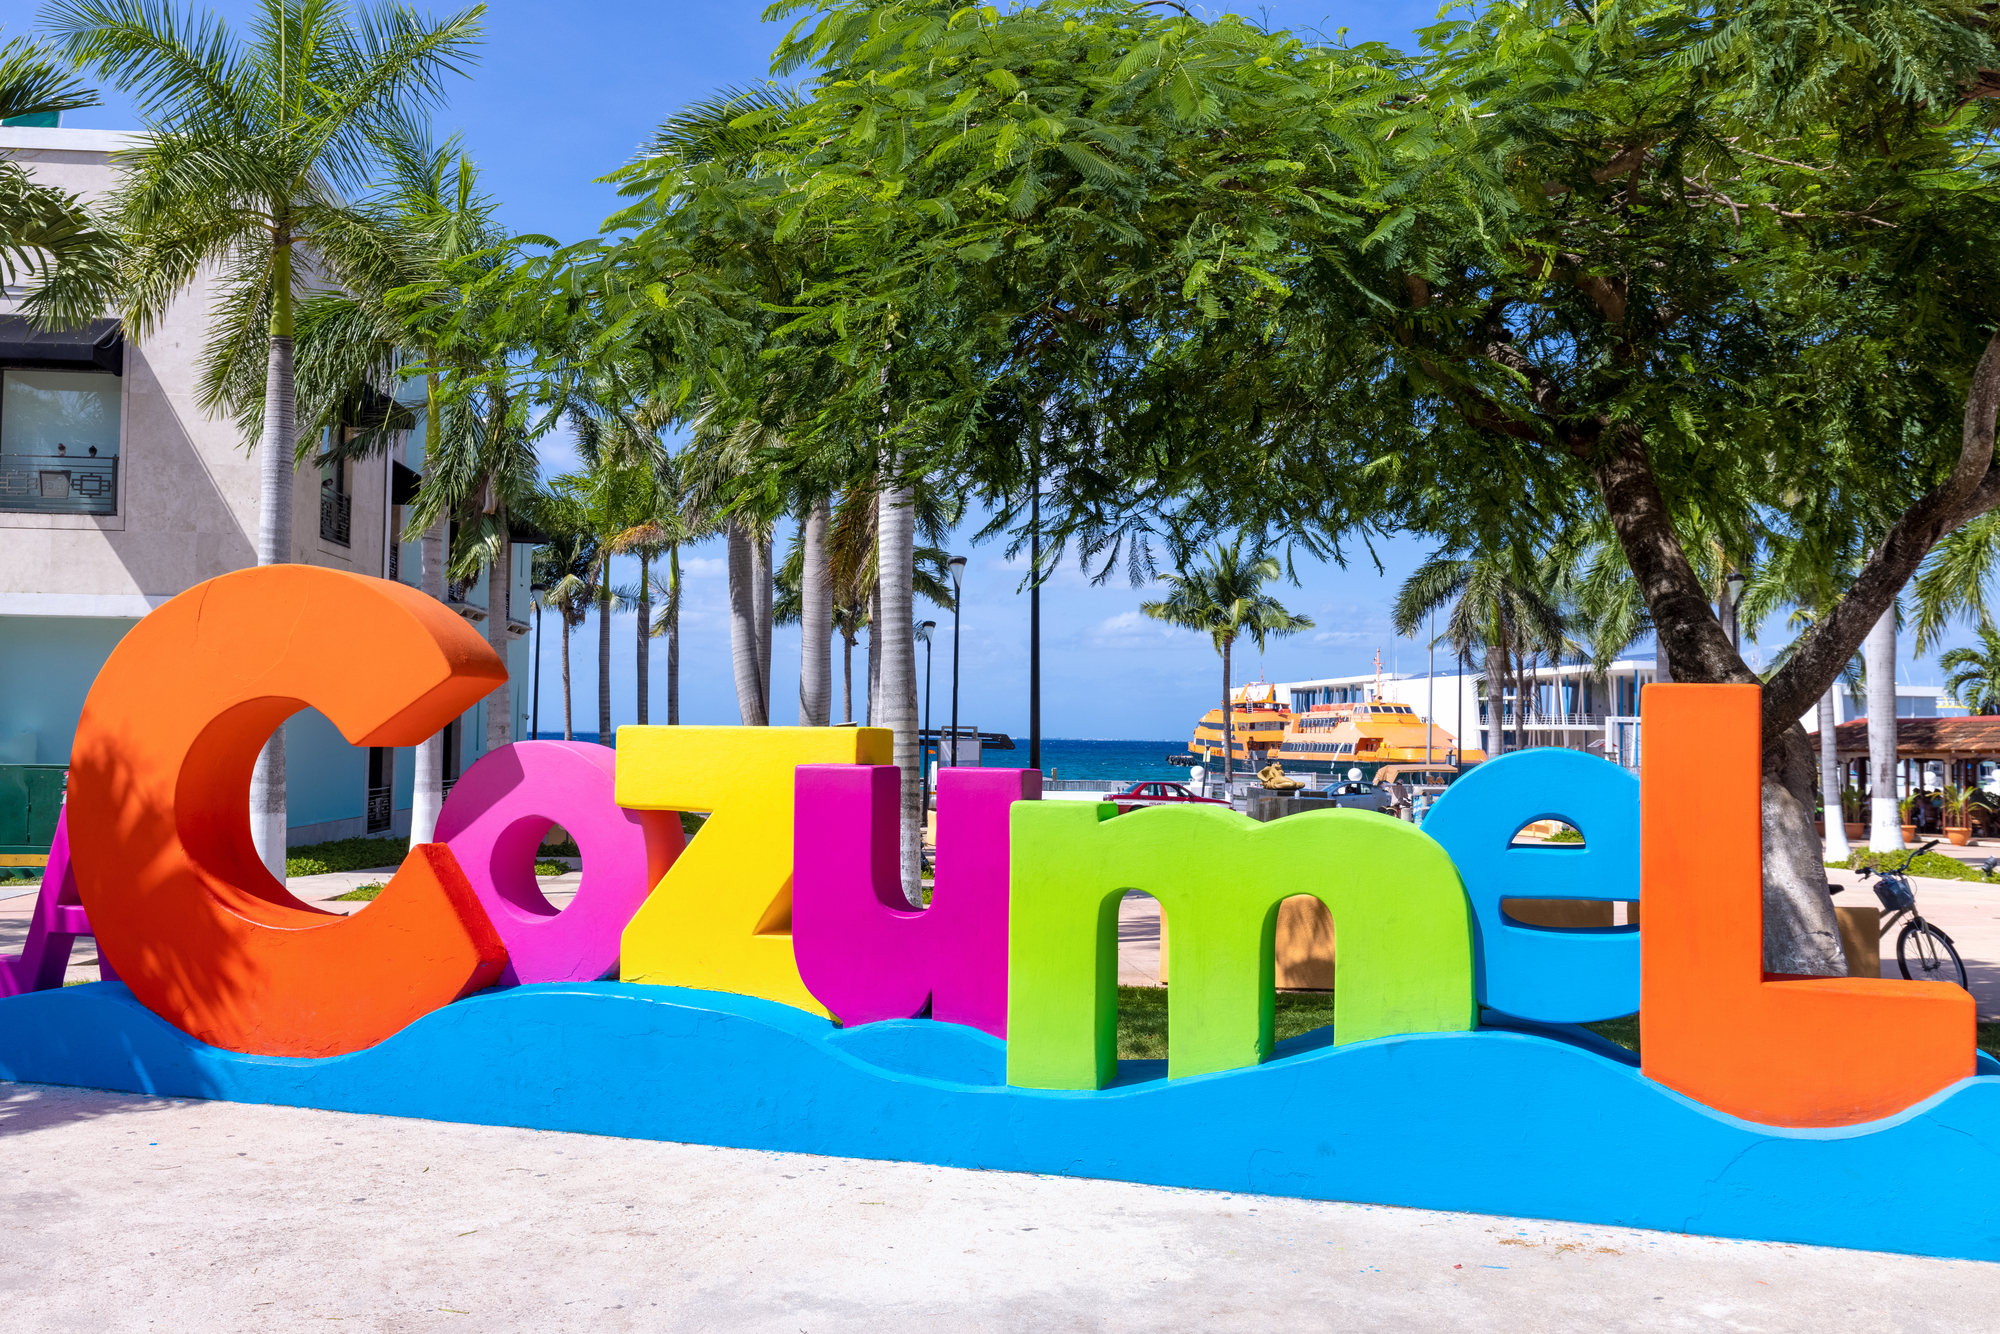 Colourful Cozumel sign with palm trees and the ferry port in the background